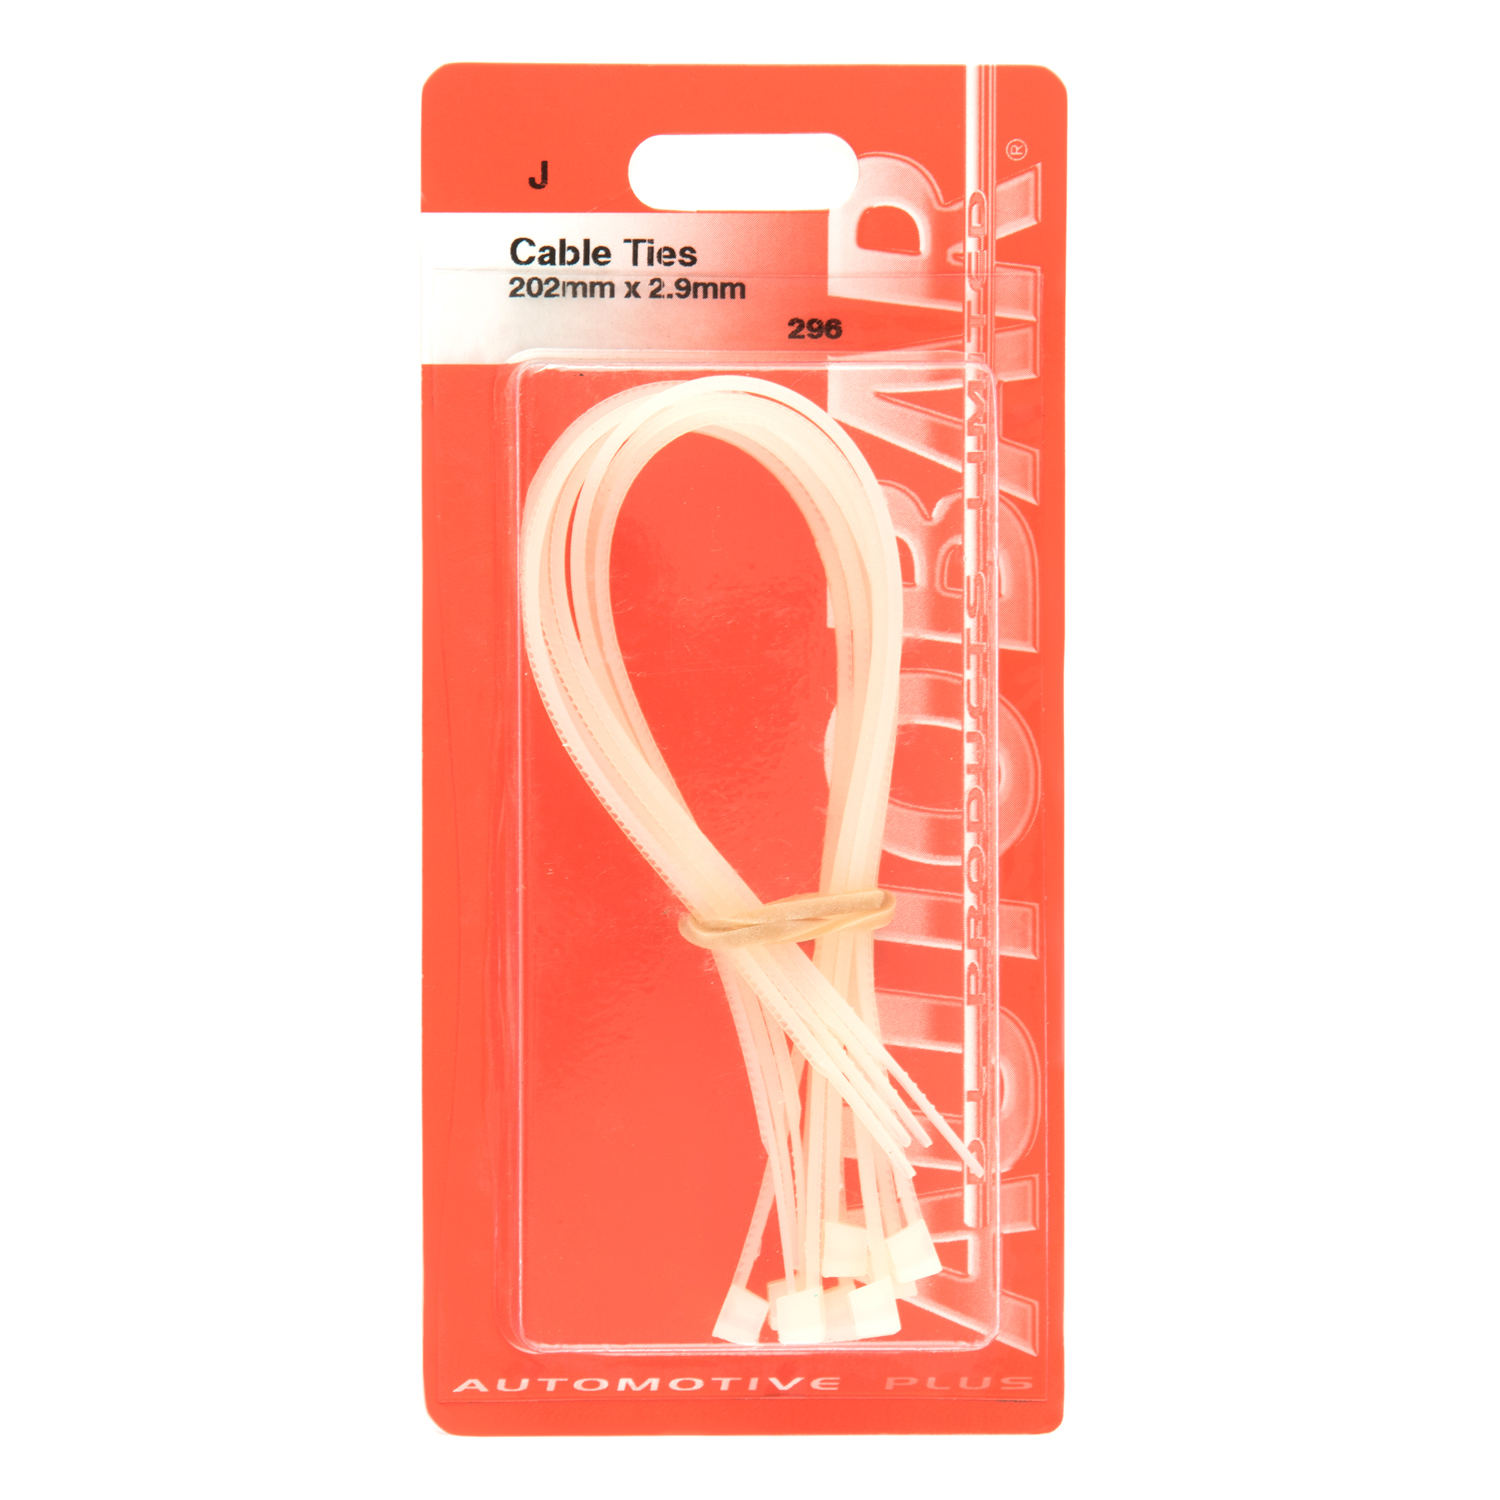 Autobar Natural Cable Tie 202 x 2.9mm Image